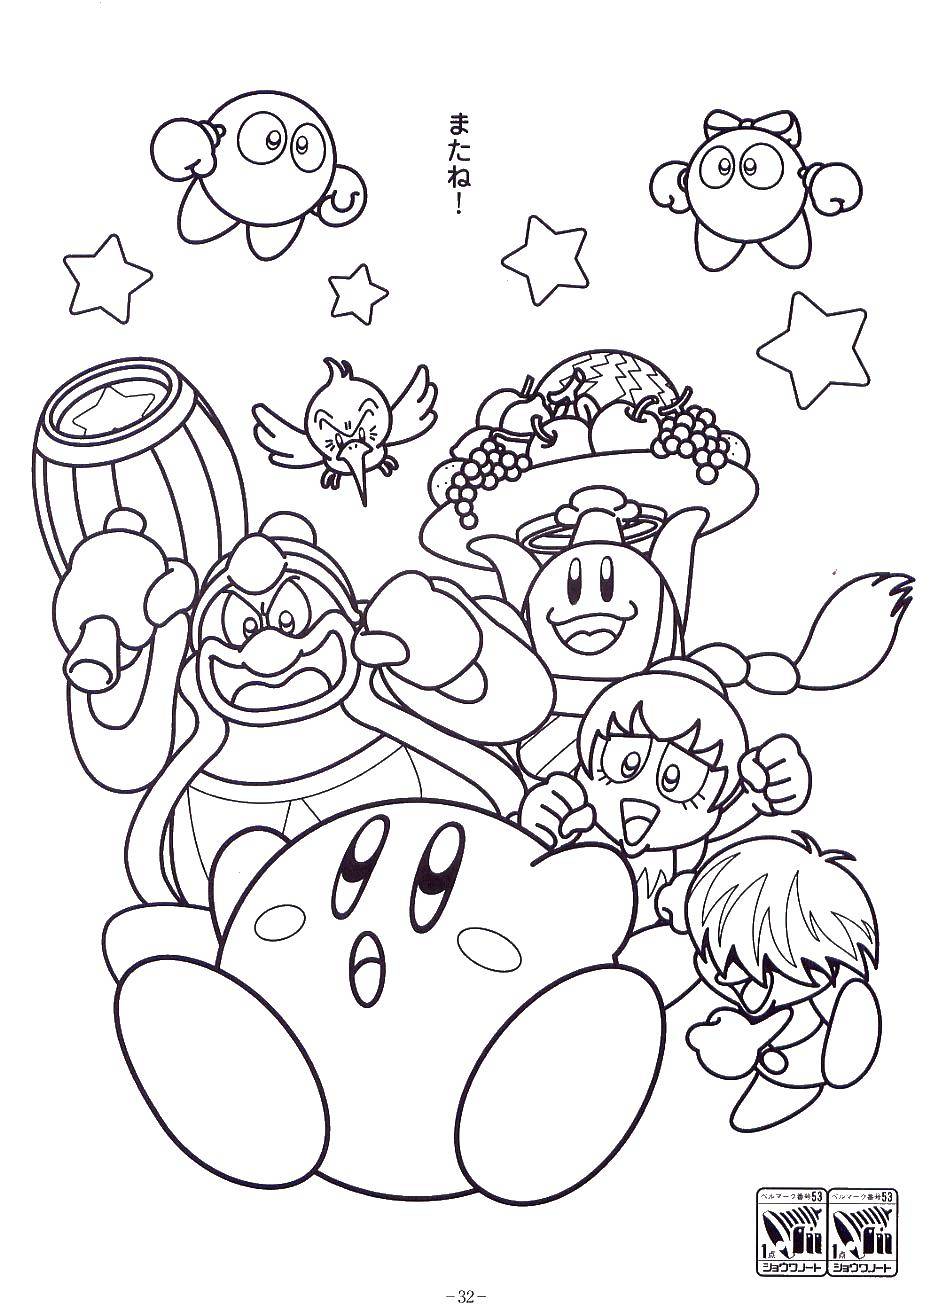 Coloring The world of Kirby. Category Kirby. Tags:  Kirby, cartoons.